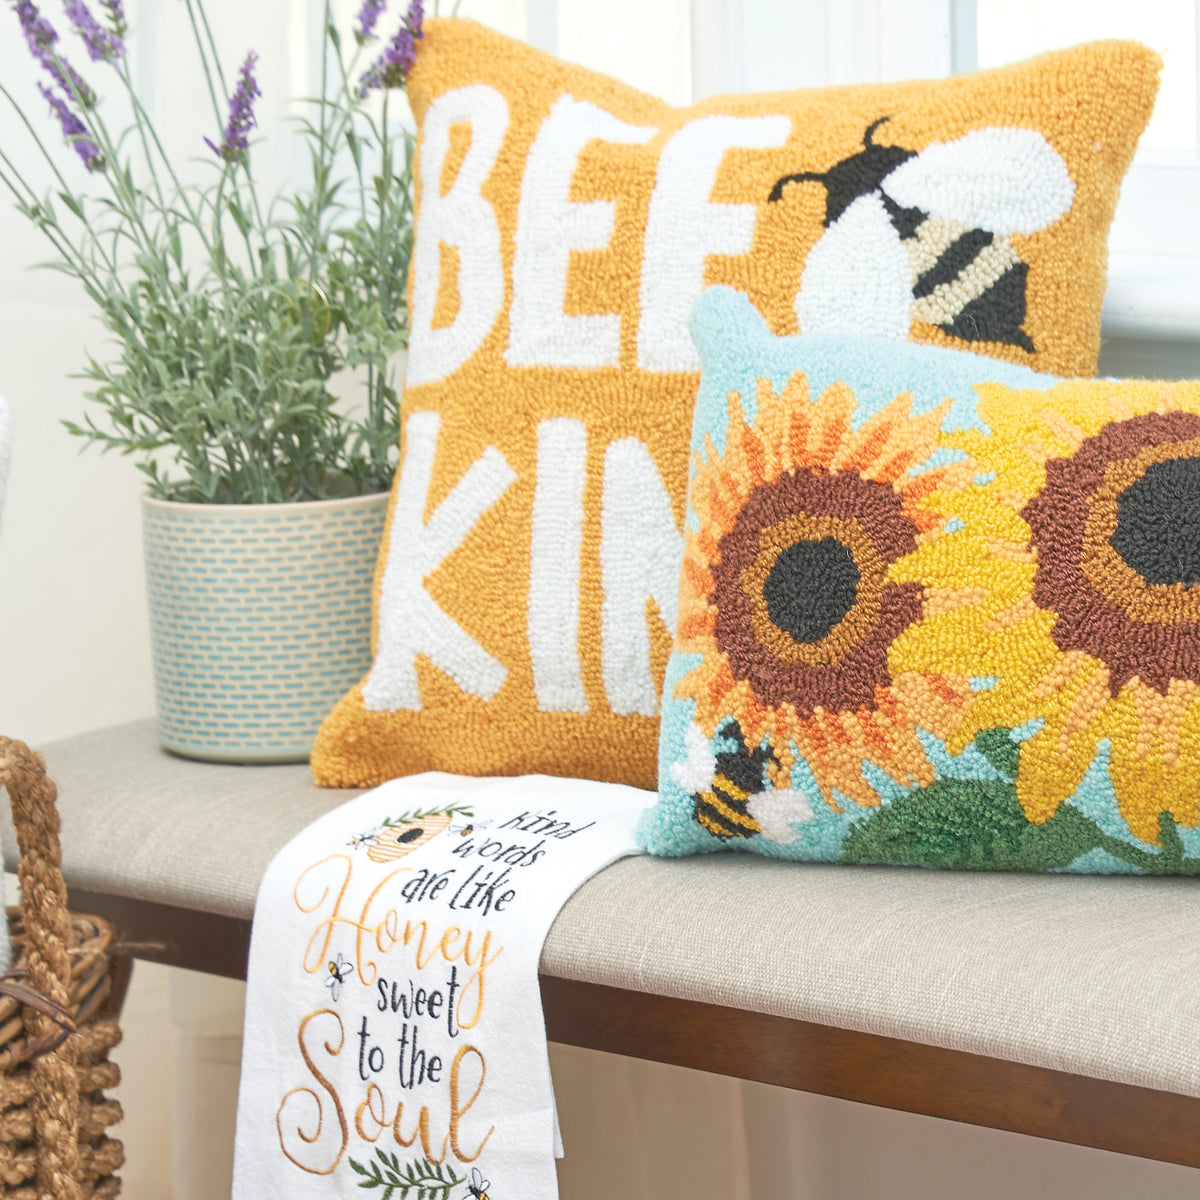 Bee Kind Hooked Pillow and Bee Kitchen Towel